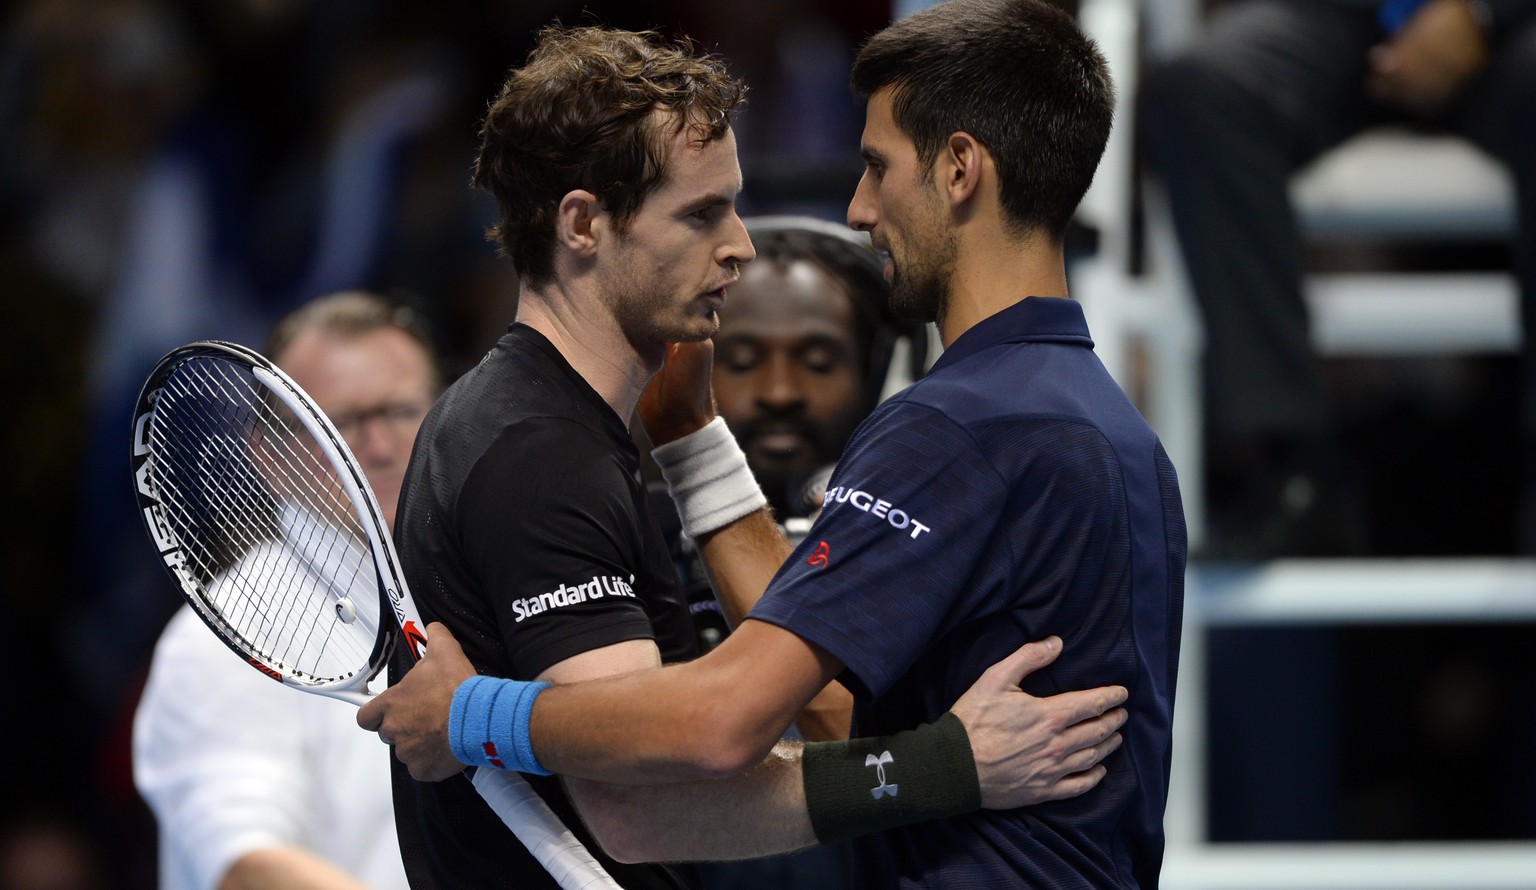 Tennis Britain - Barclays ATP World Tour Finals - O2 Arena, London - 20/11/16 Great Britain&#039;s Andy Murray with Serbia&#039;s Novak Djokovic after winning the final Action Images via Reuters / Ton ...